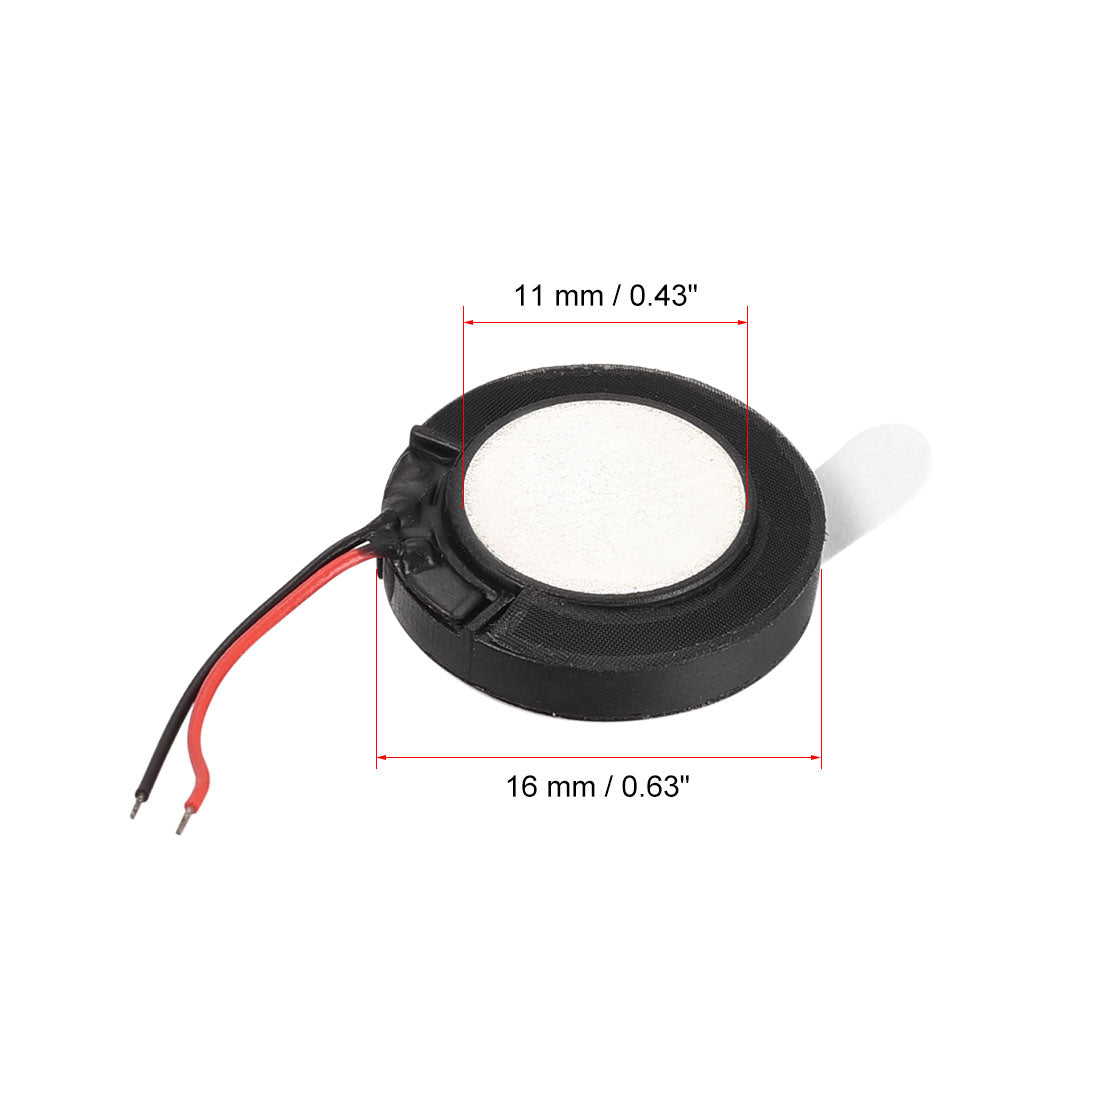 uxcell Uxcell 1W 8 Ohm 16mm Dia Speaker with Wire for Electronic Projects 2pcs